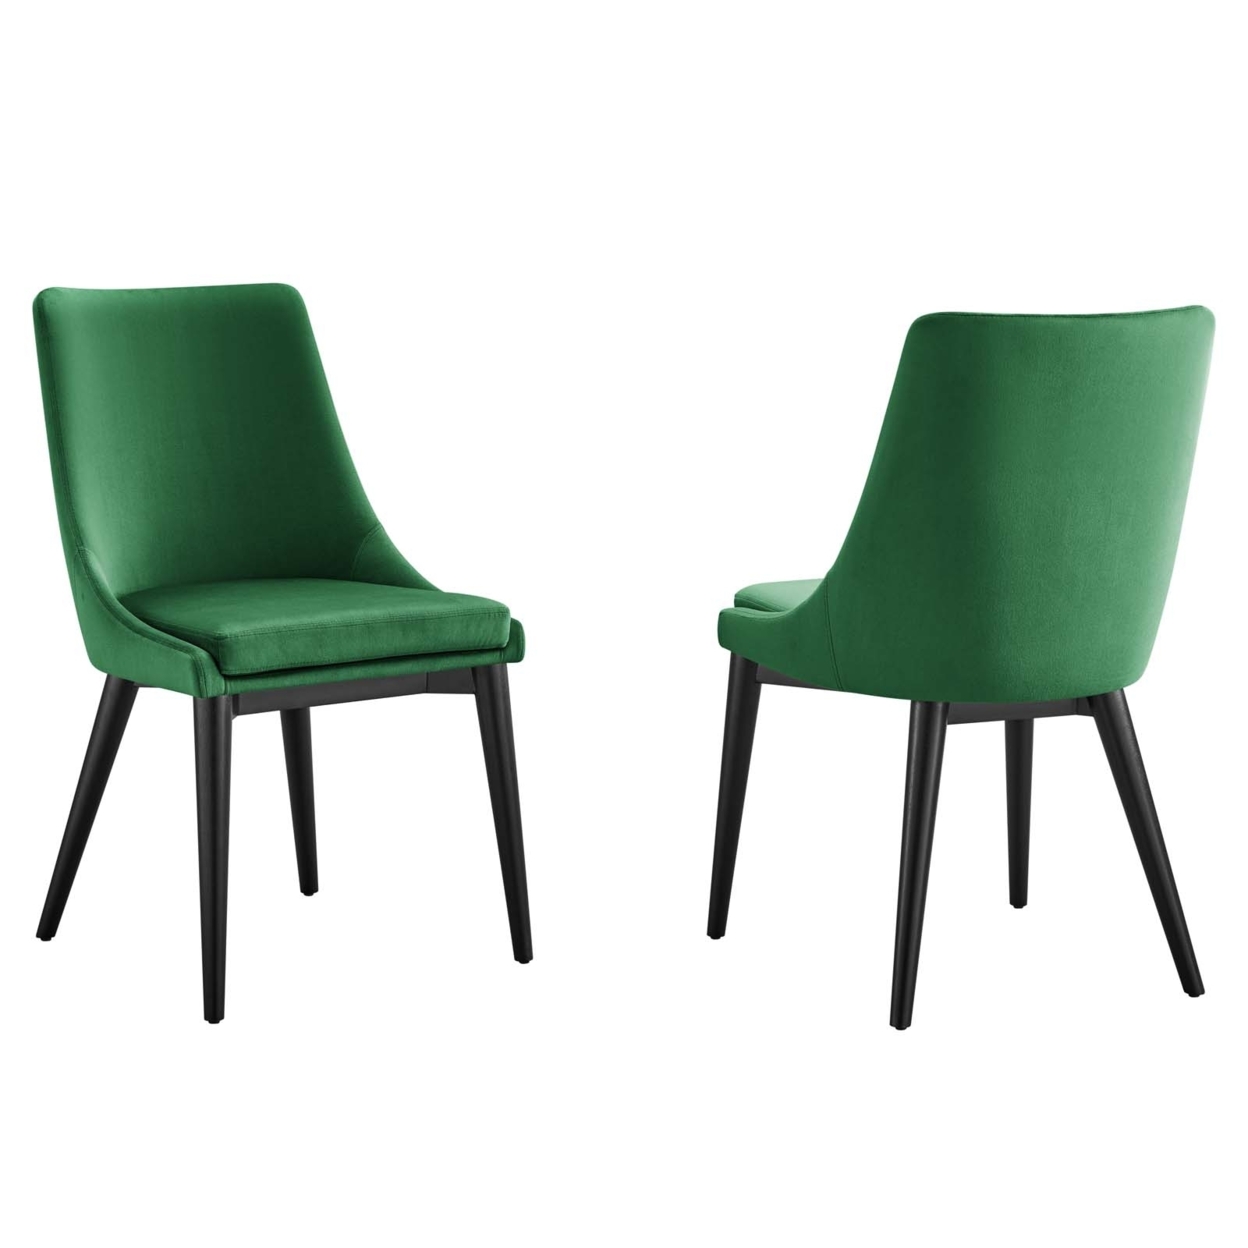 Viscount Accent Performance Velvet Dining Chairs - Set Of 2, Emerald